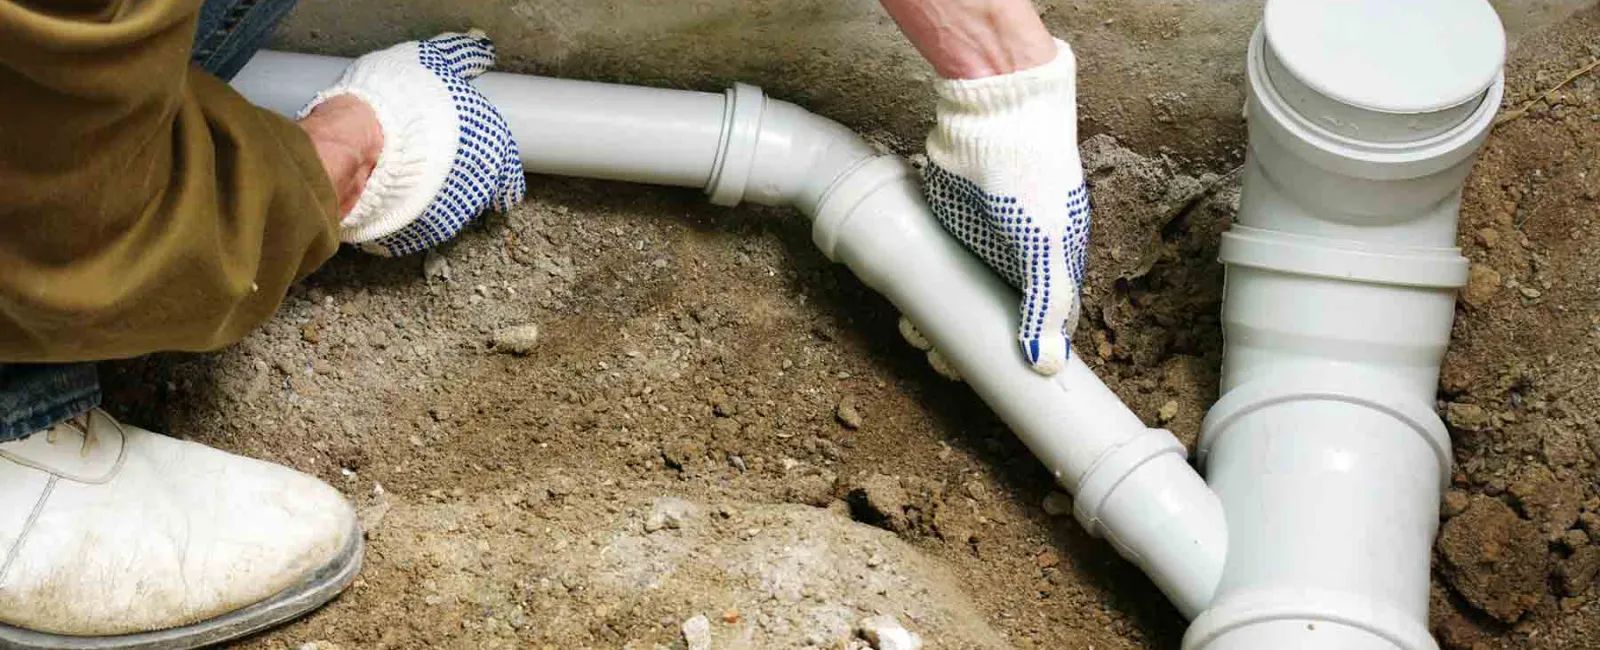 sewer pipe lining for a cracked sewer pipe